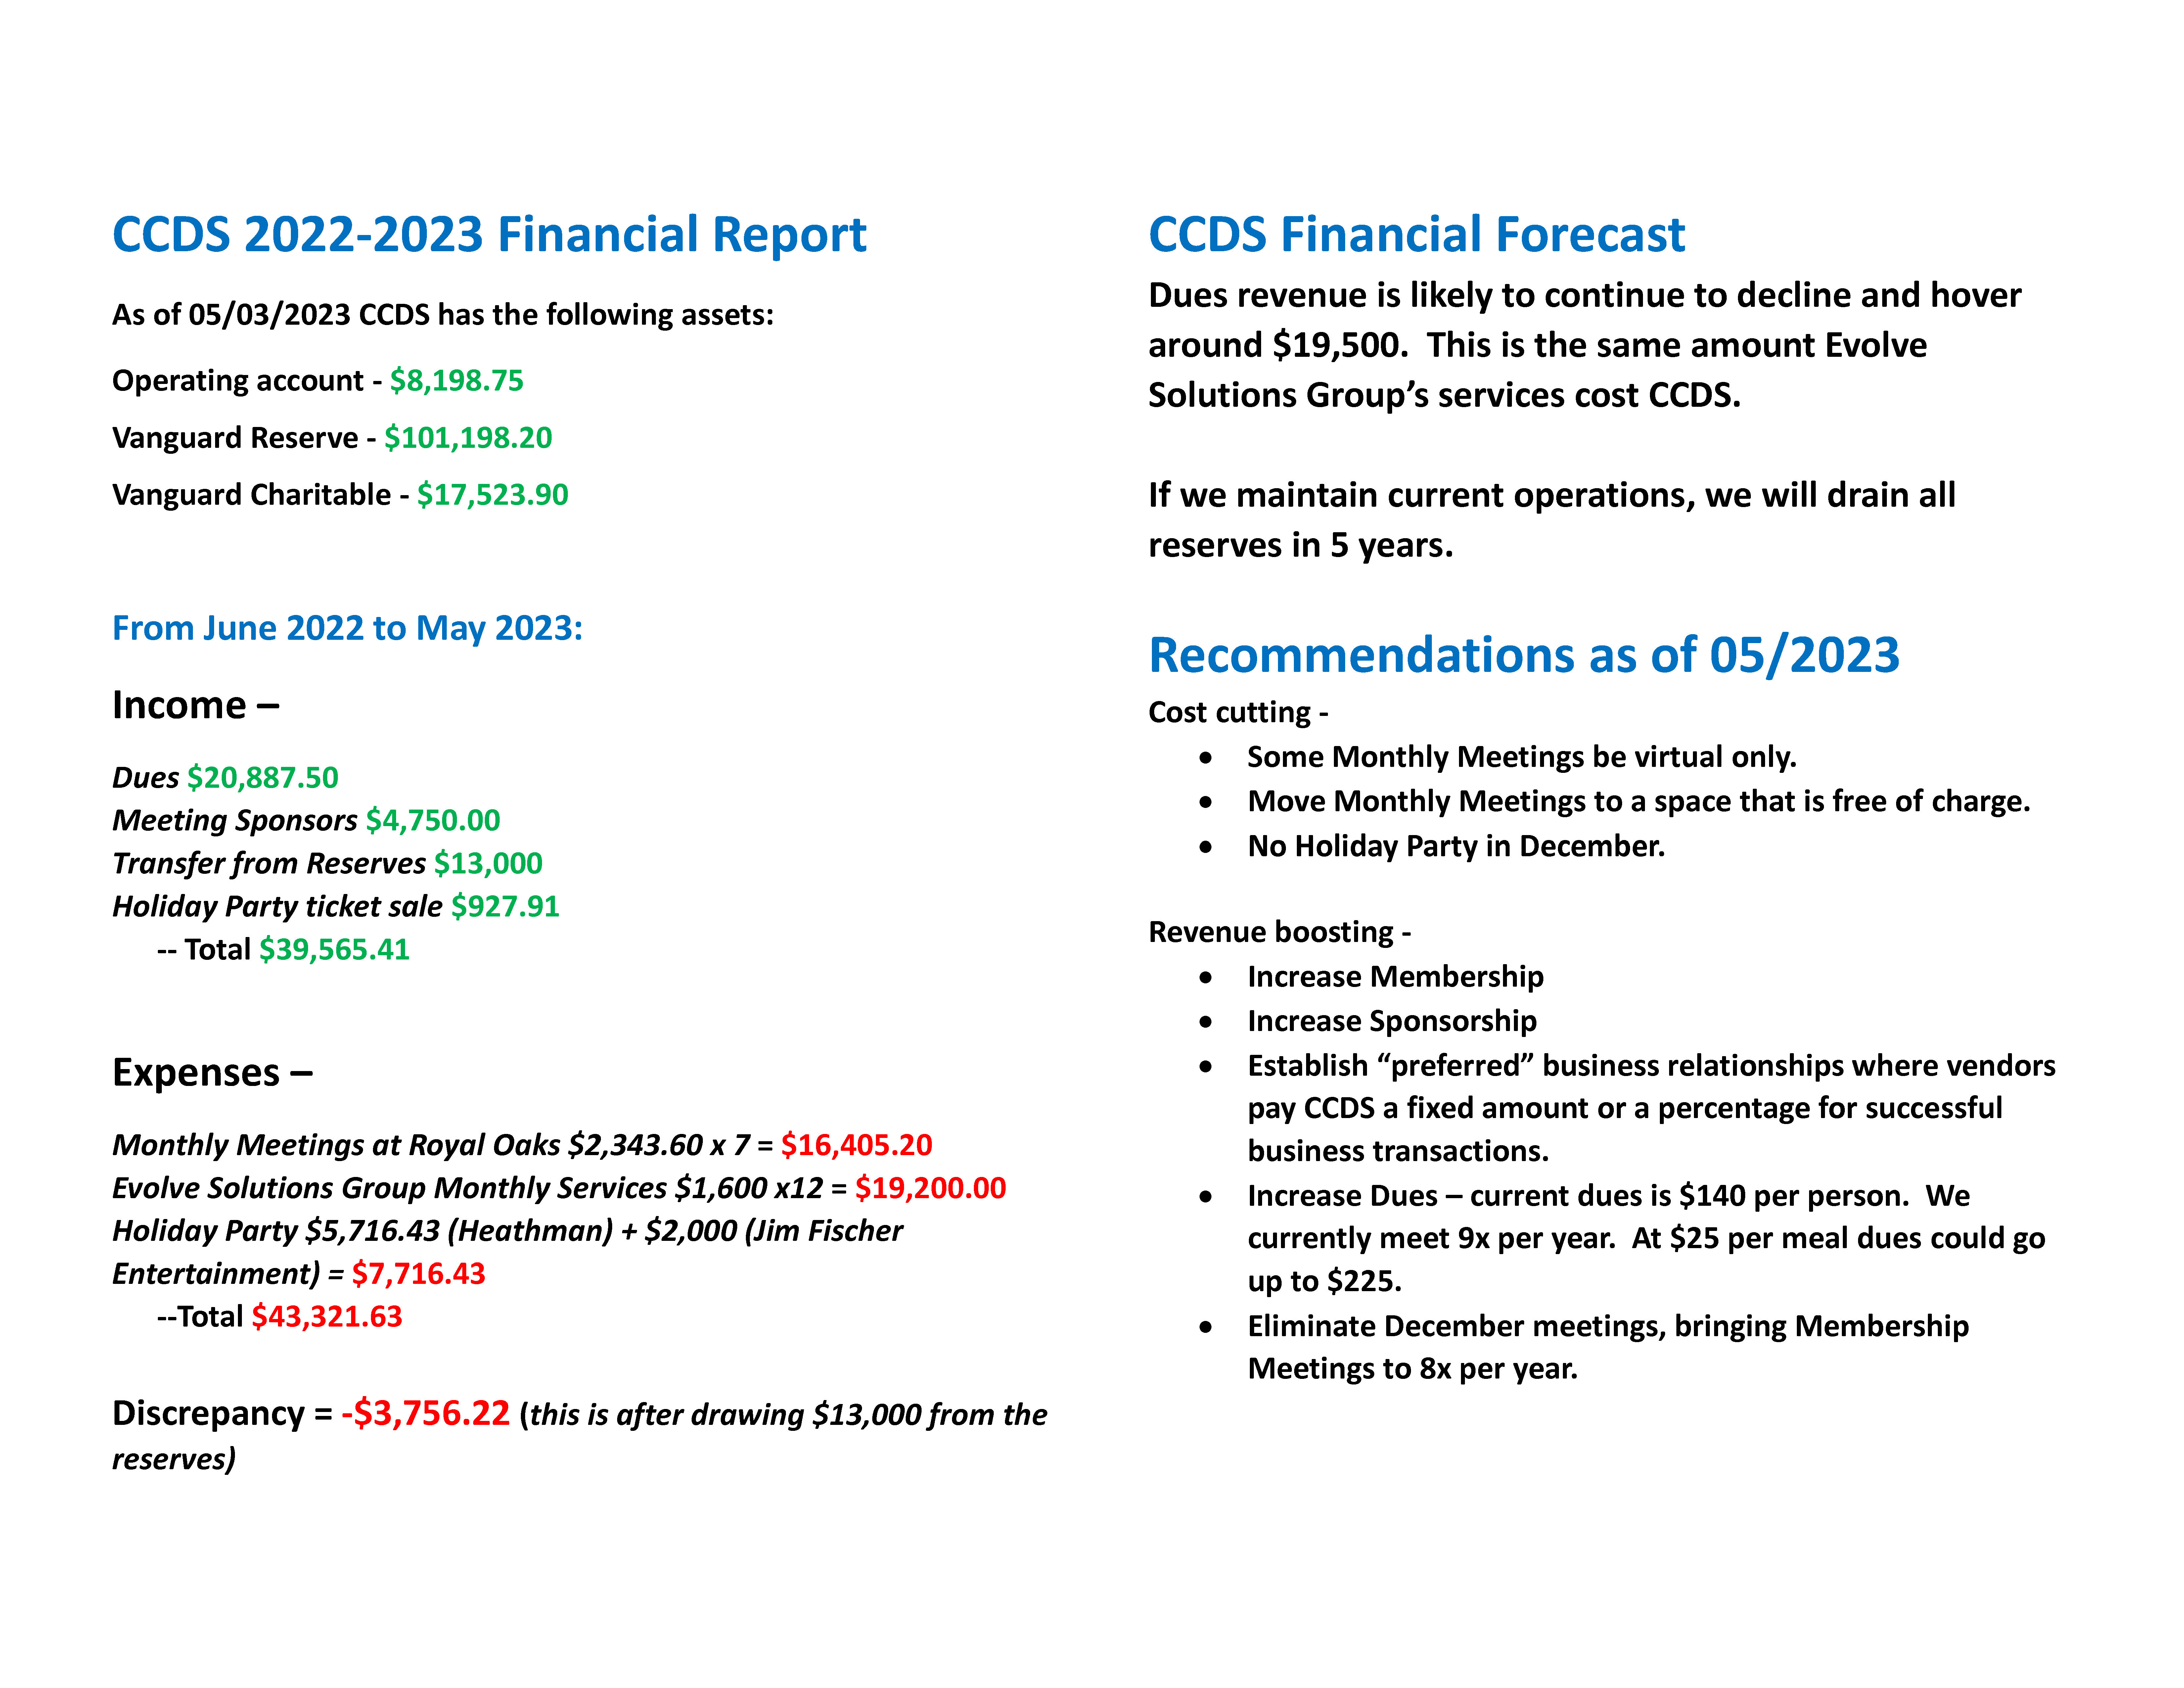 CCDS-Financial Report 2022-2023